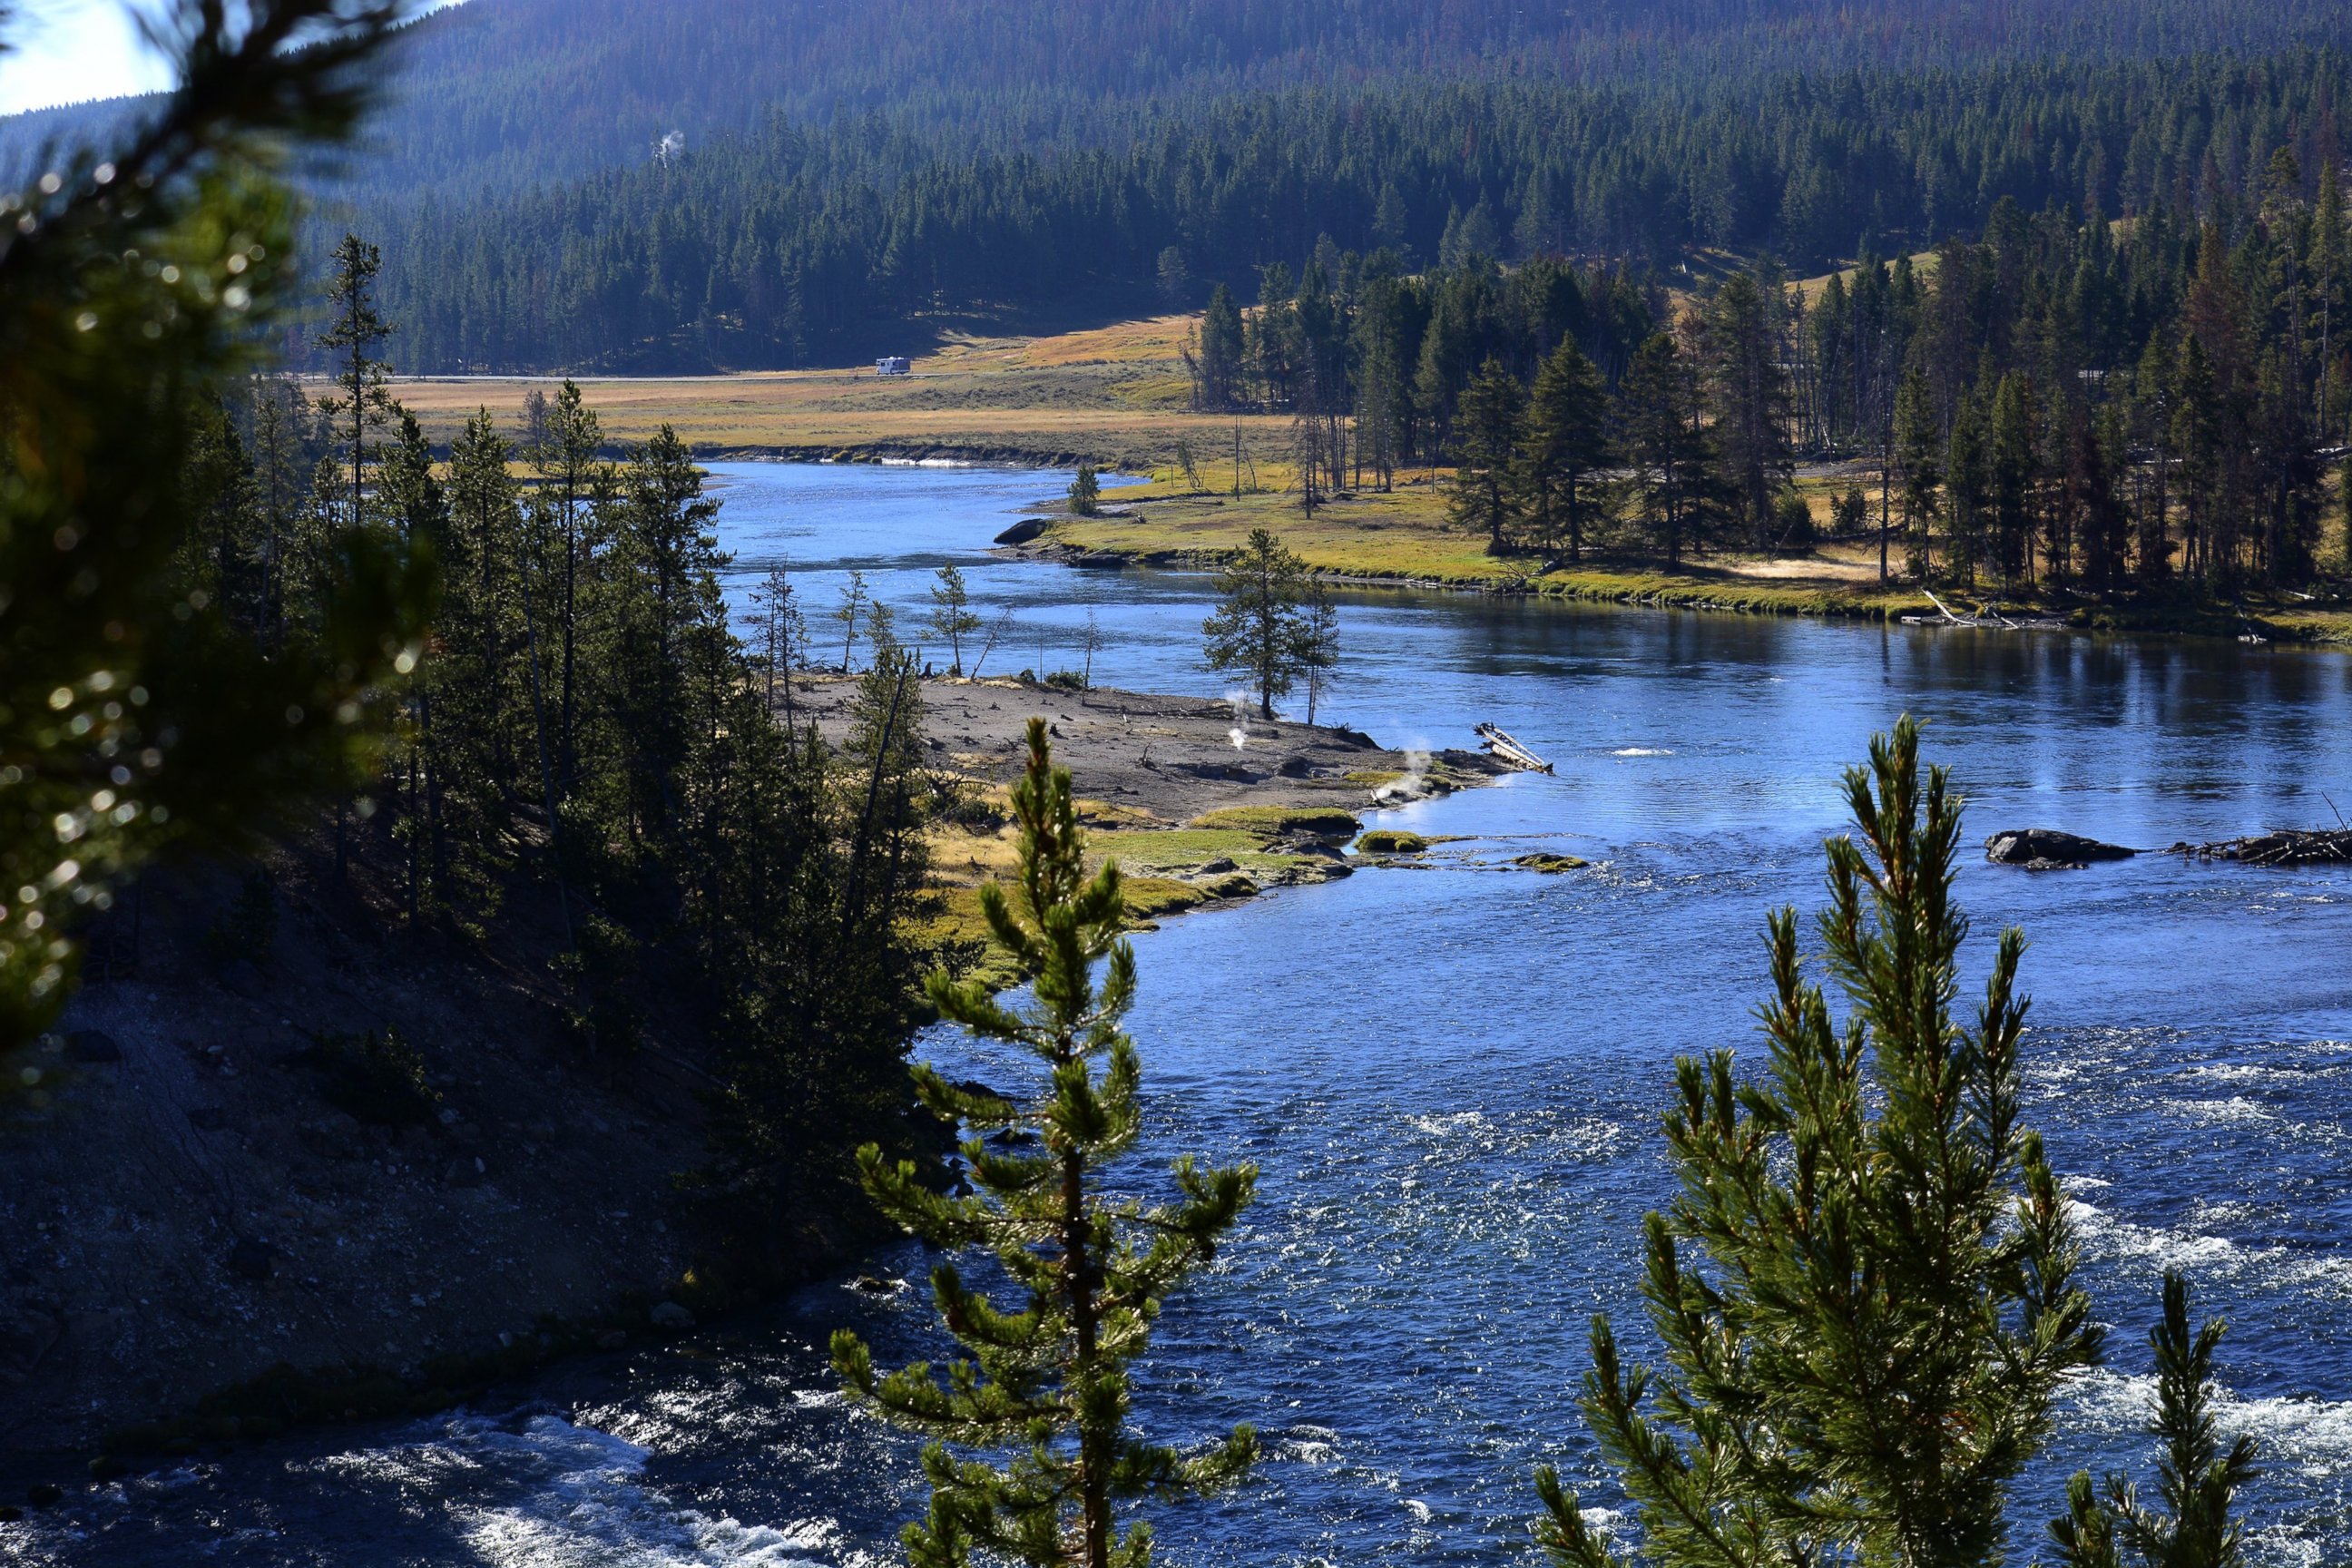 PHOTO: In this file photo, the Yellowstone River flows through Yellowstone National Park in Wyoming on September 25, 2014.